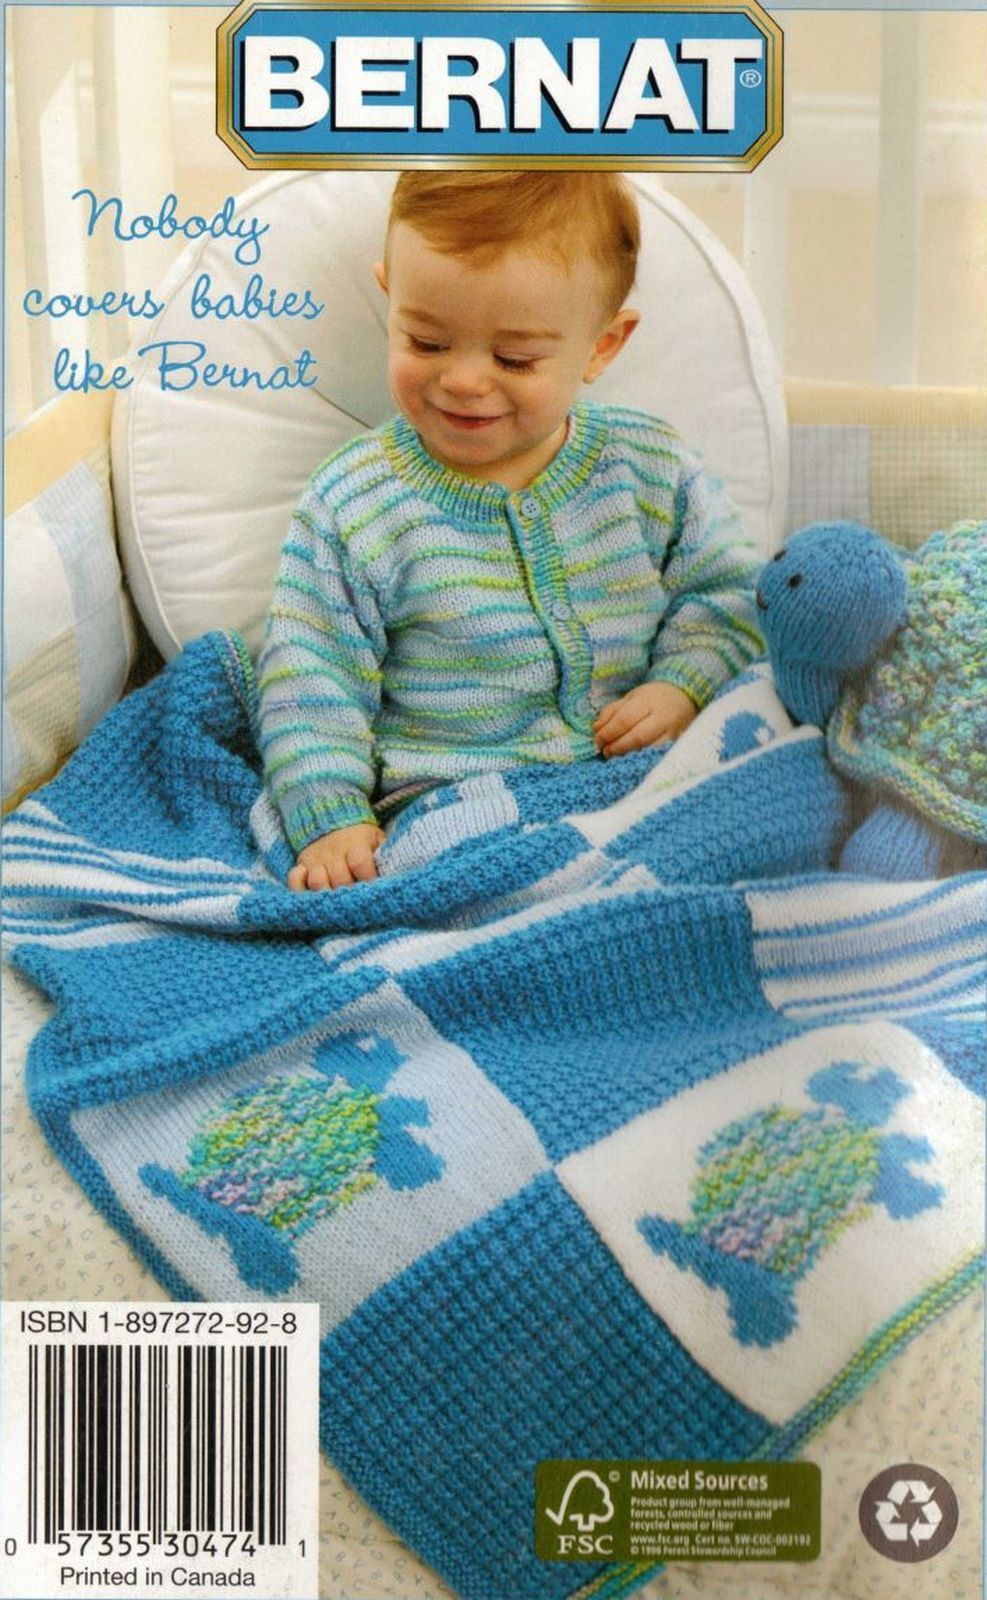 Knit Crochet Baby Blanket Hat Scarf Jacket Toy Pullover Patterns 6-24 Months  - $12.99